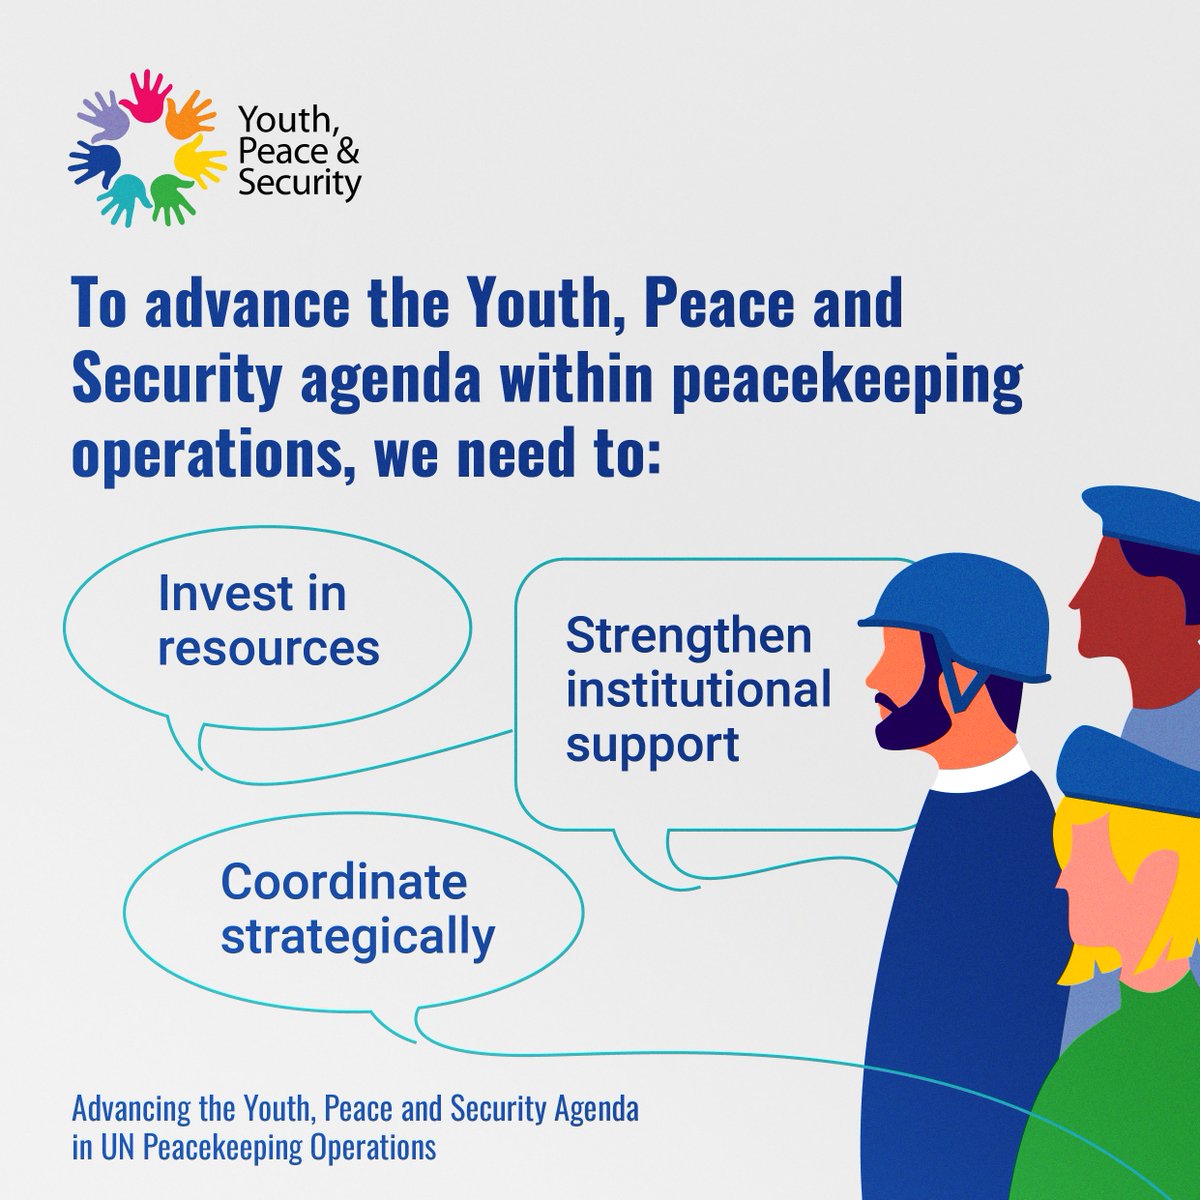 To build peaceful and just societies young people need increased investment, collaboration and commitment from all of society 🕊 Explore our findings on advancing the #Youth4Peace agenda in @UNPeacekeeping Operations 🌍 un.org/youthenvoy/wp-…